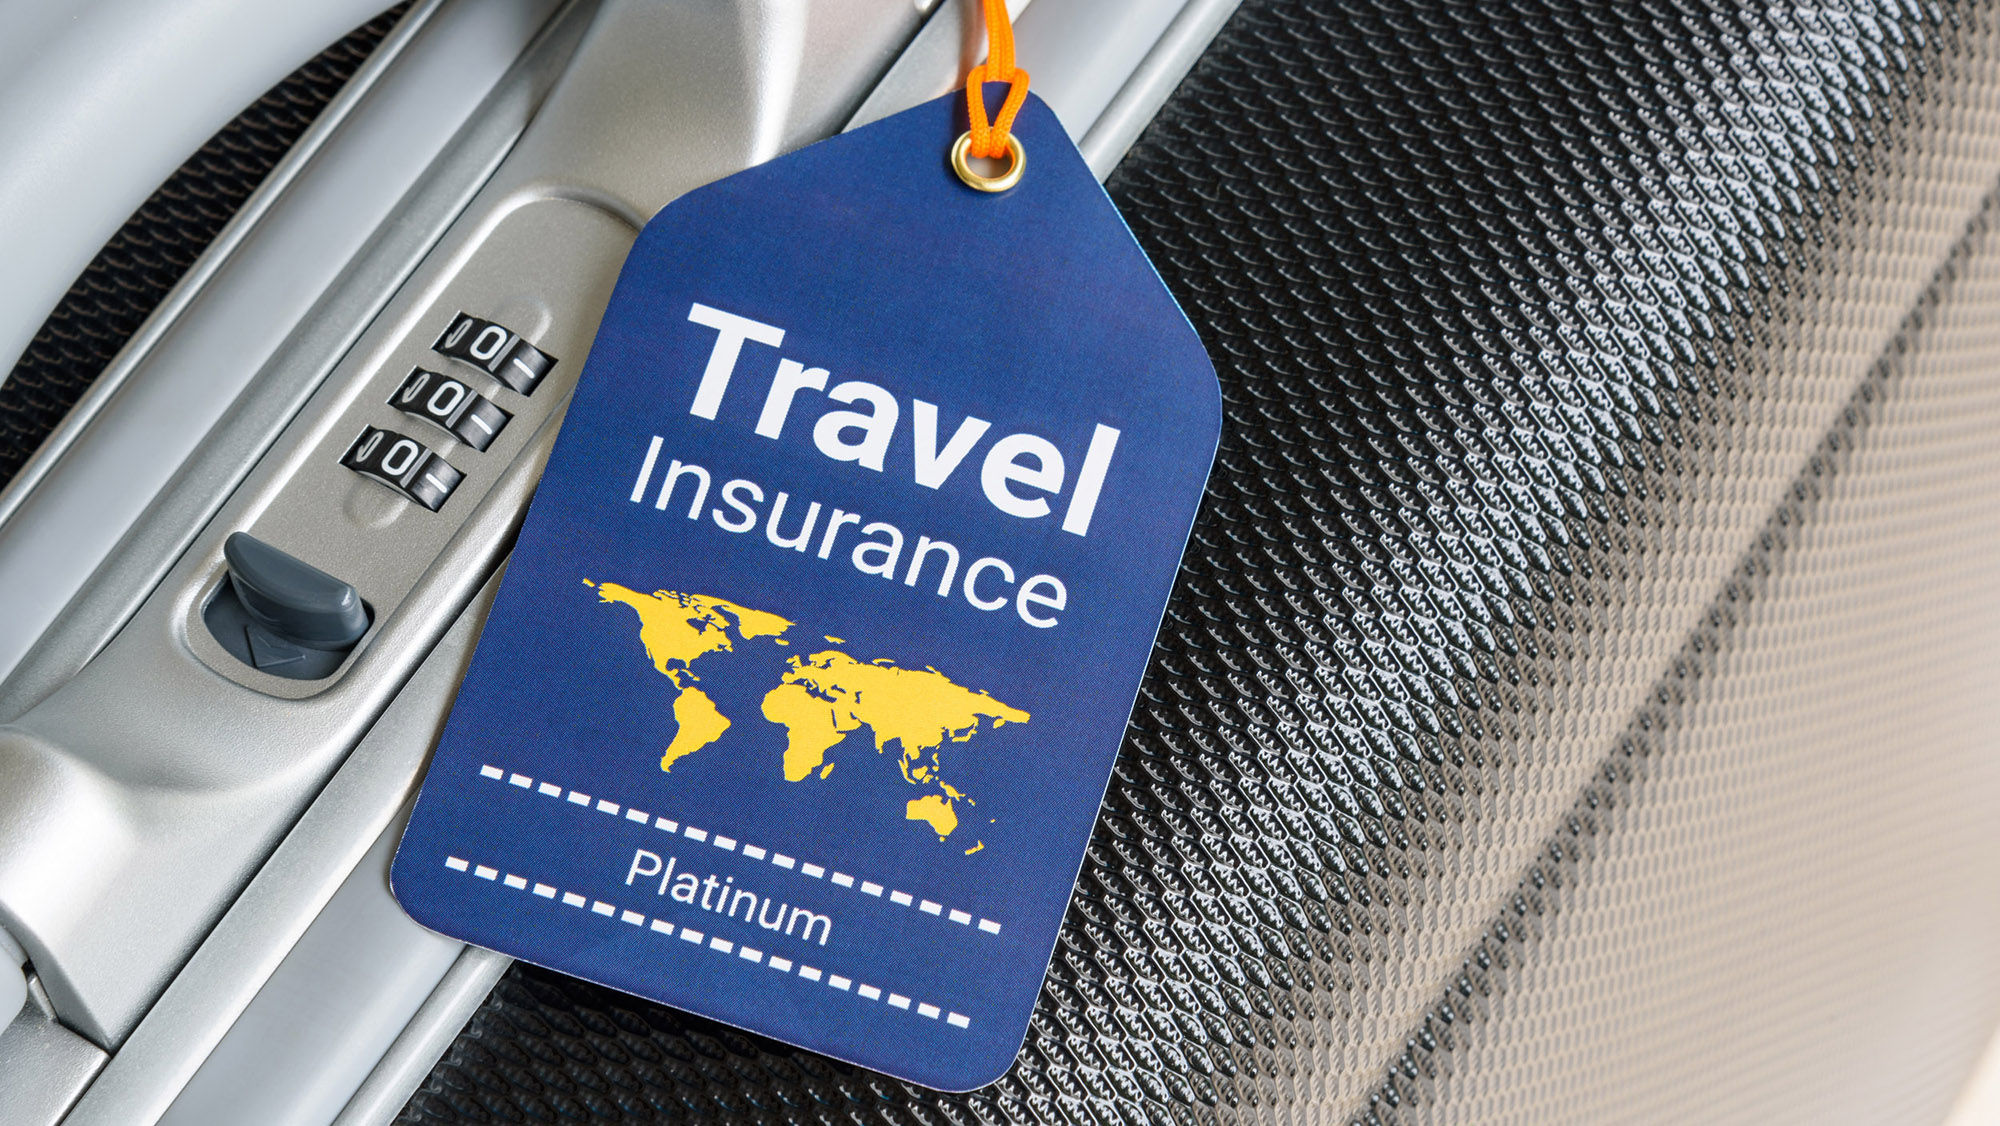 Travel insurance tag on luggage